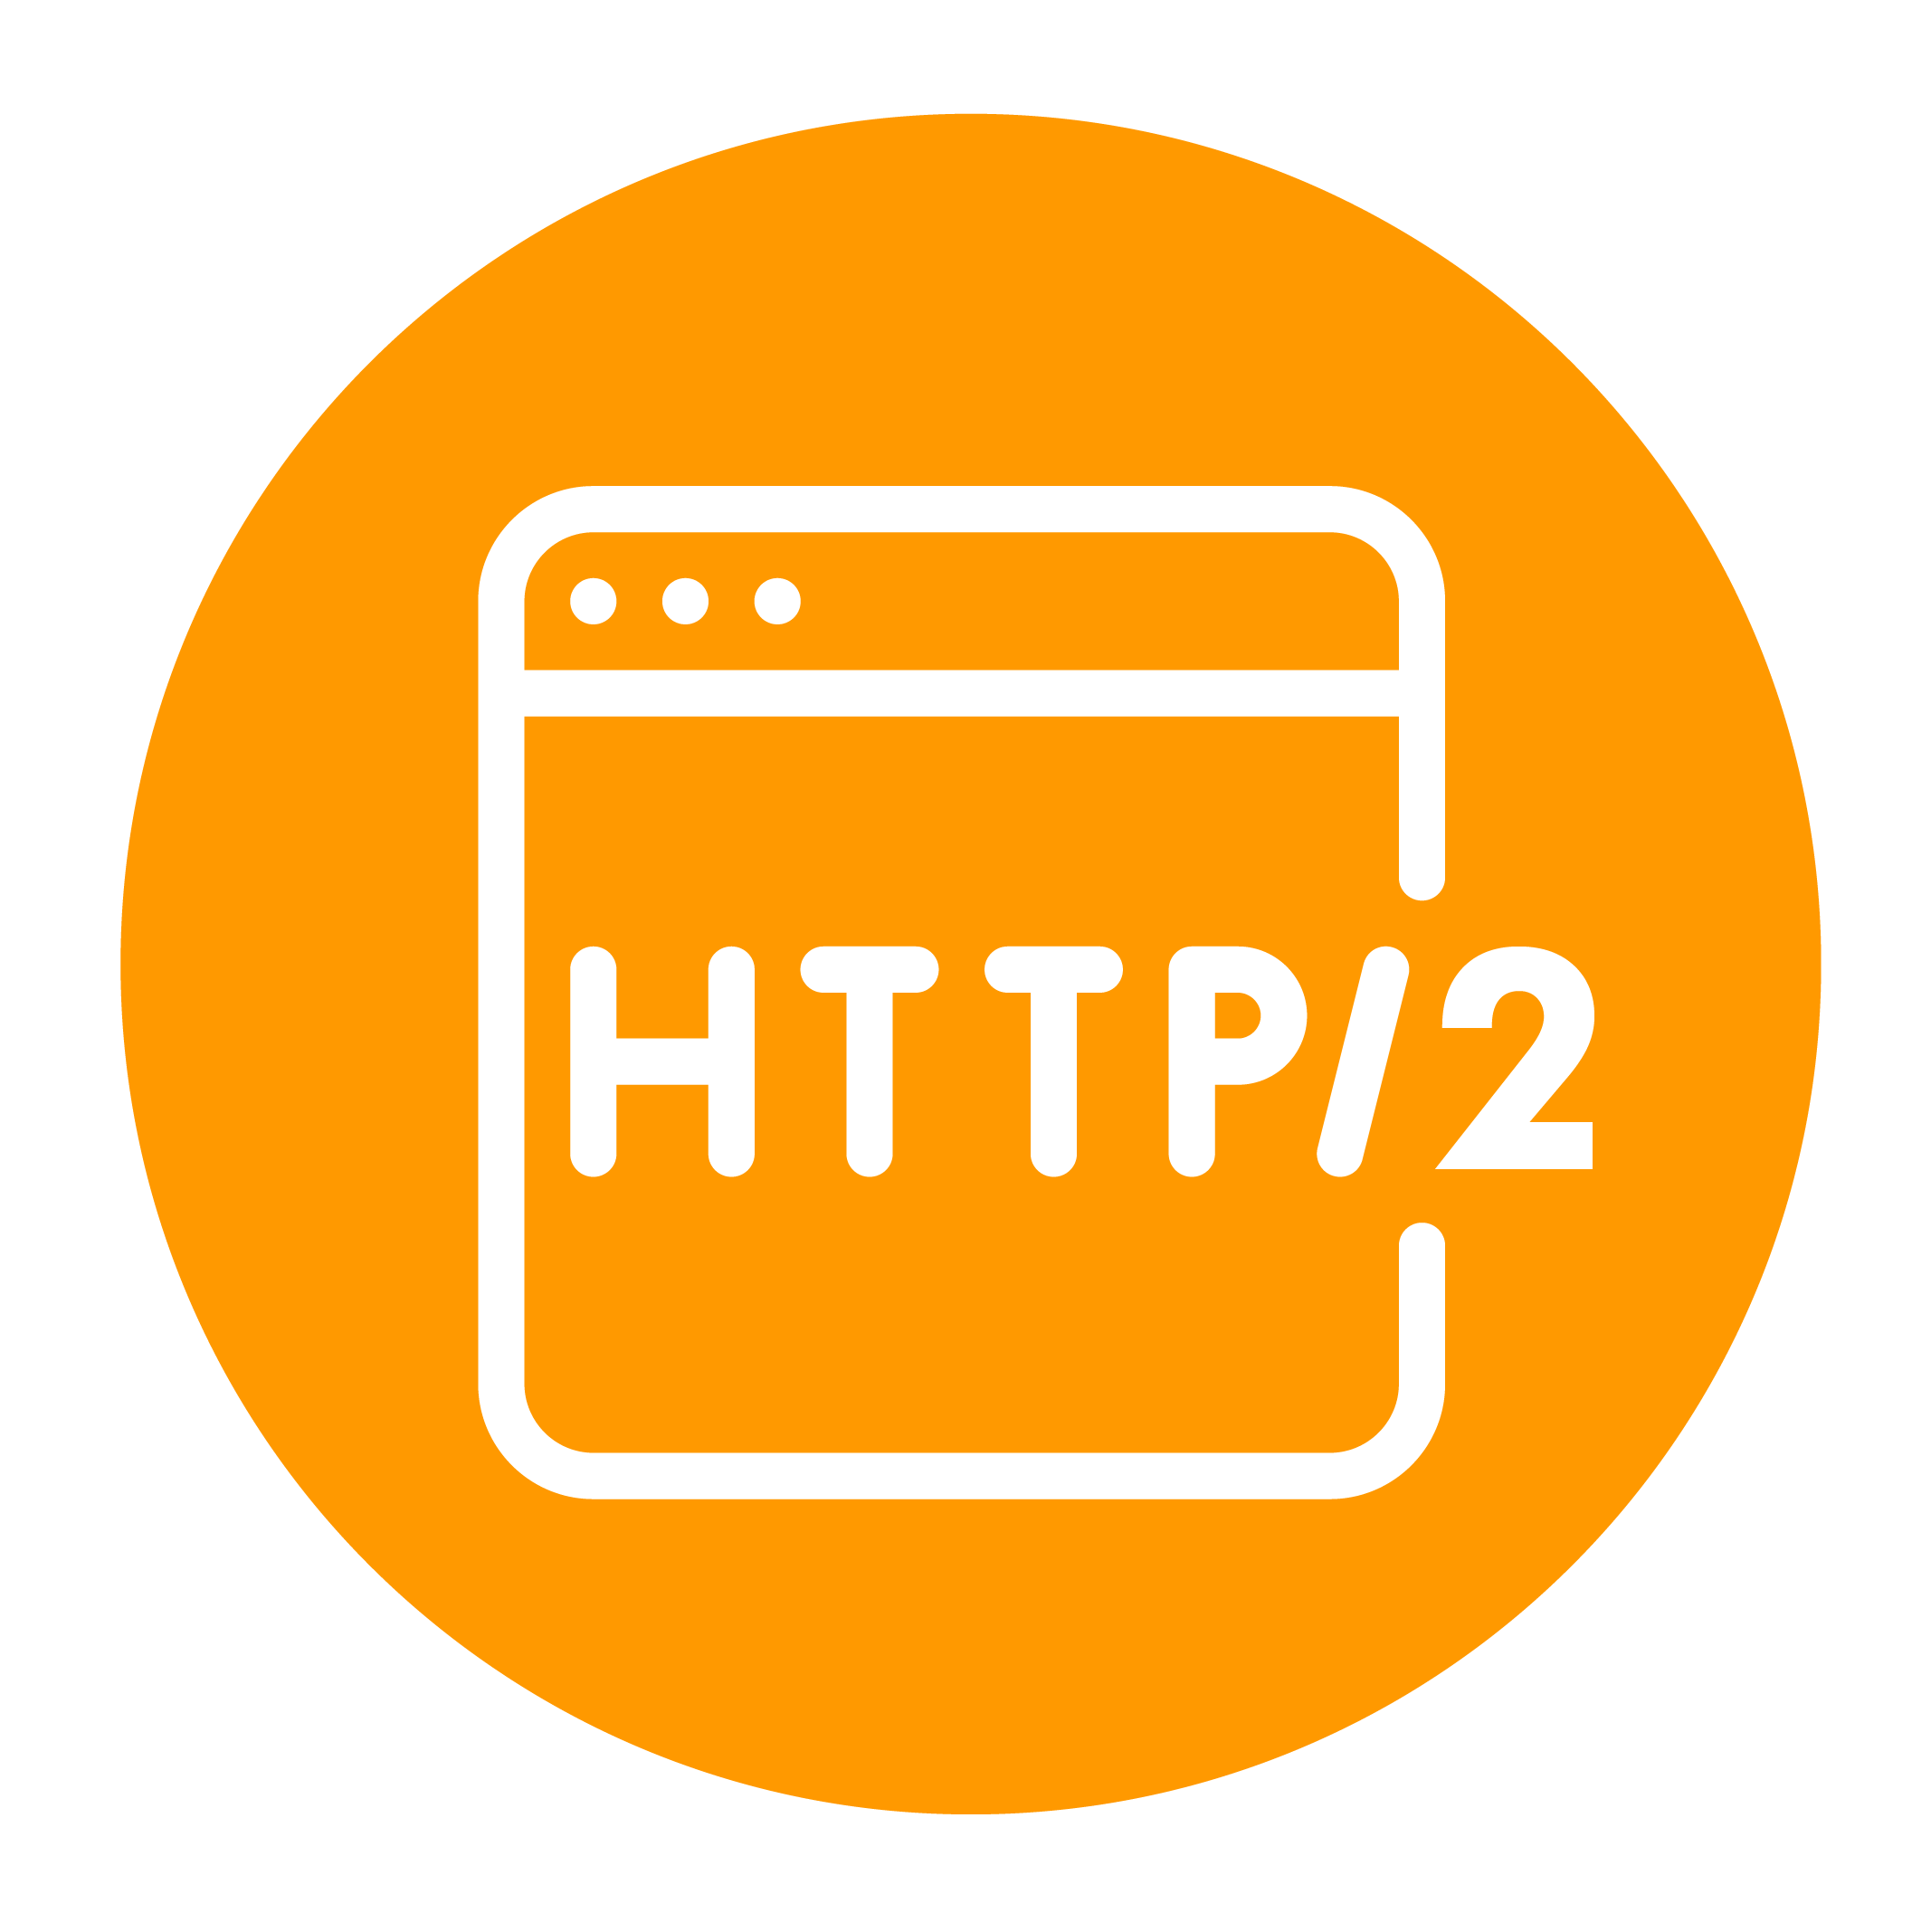 Support Http2